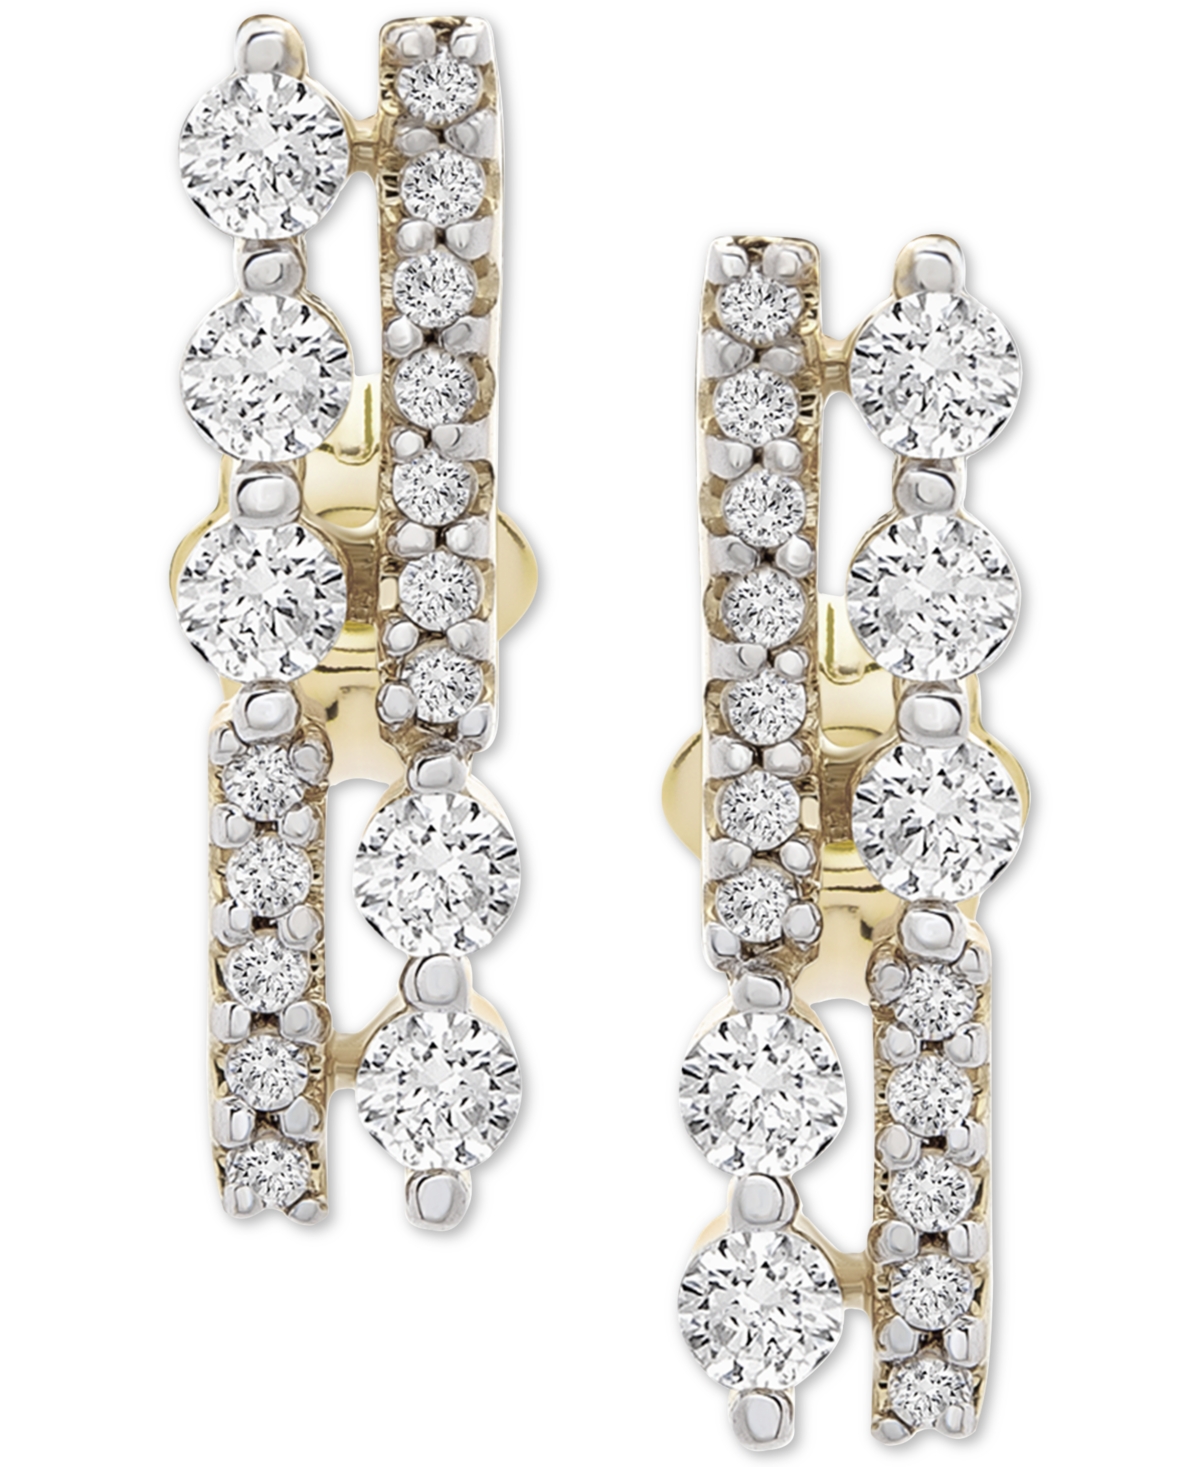 Diamond Bar Stud Earrings (1/3 ct. t.w.) in 14k Gold, Created for Macy's - Yellow Gold